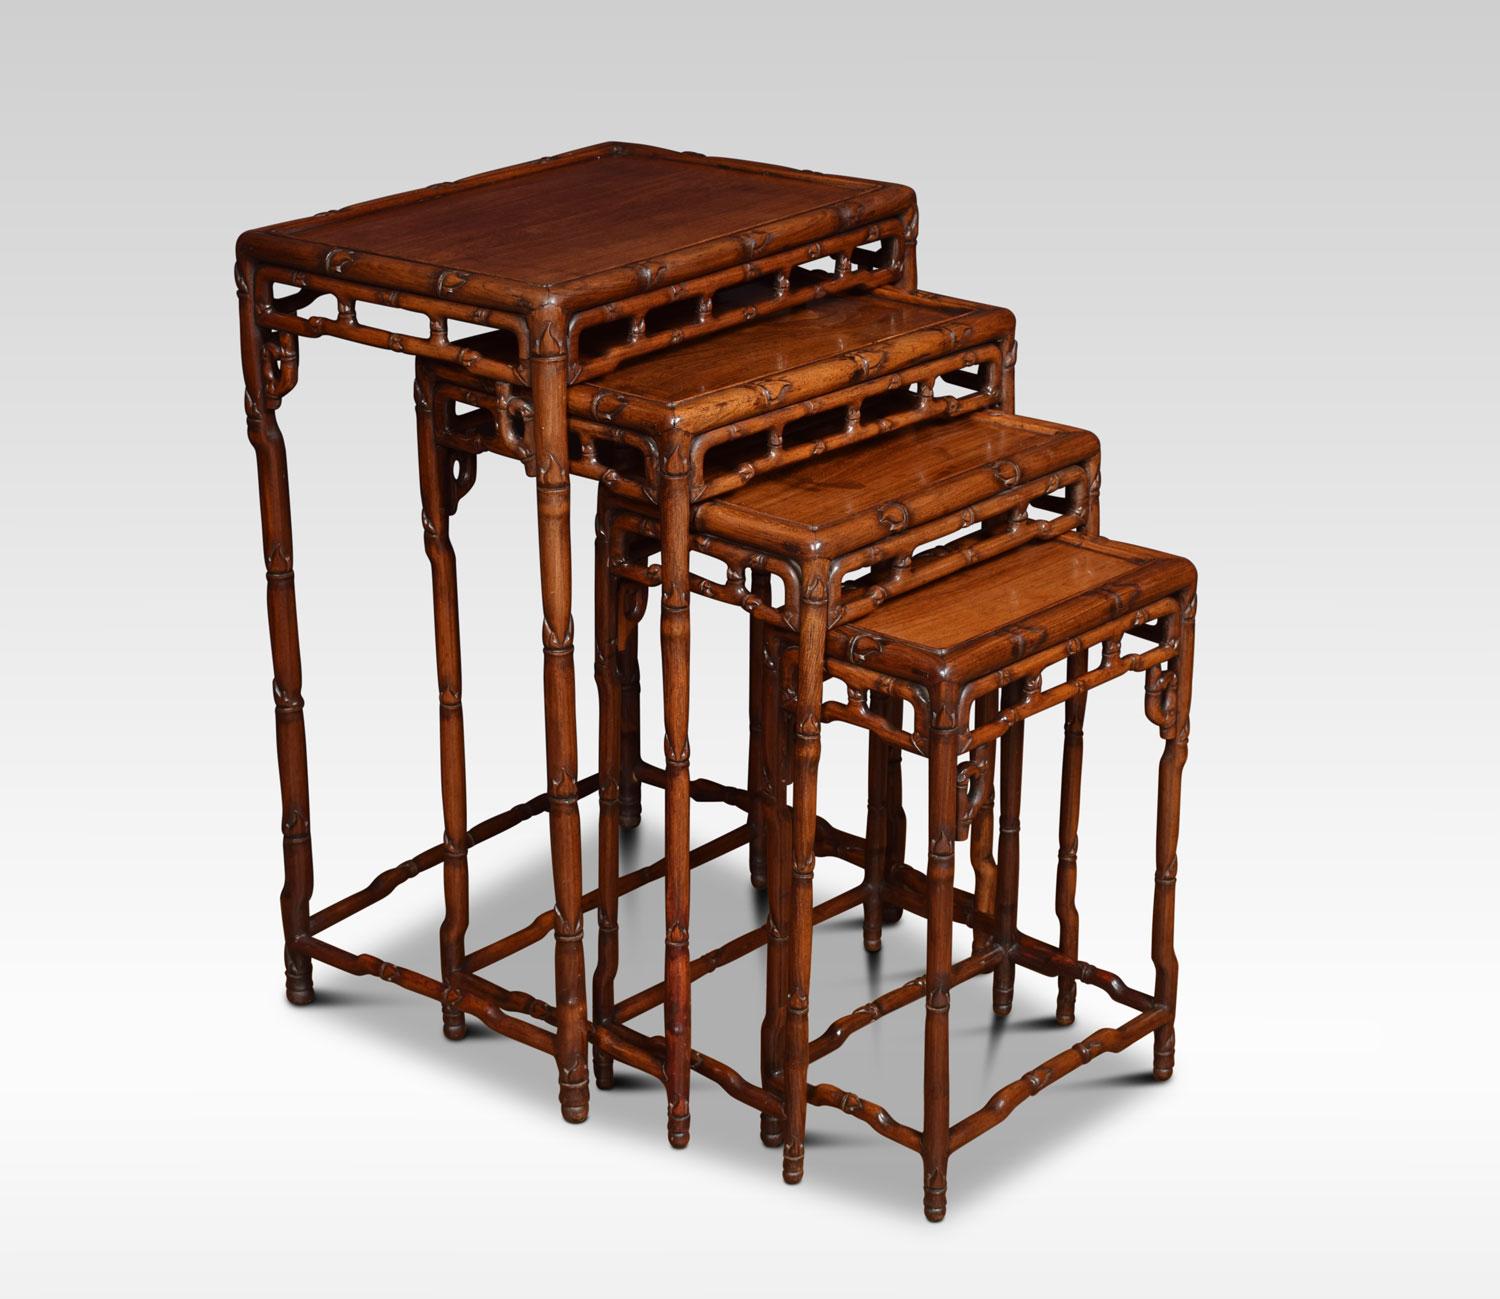 A nest of four rosewood tables having rectangular tops and pierced friezes. Raised up on faux bamboo legs with conforming stretchers.
Dimensions:
Height 29 inches
Width 20 inches
Depth 14.5 inches.